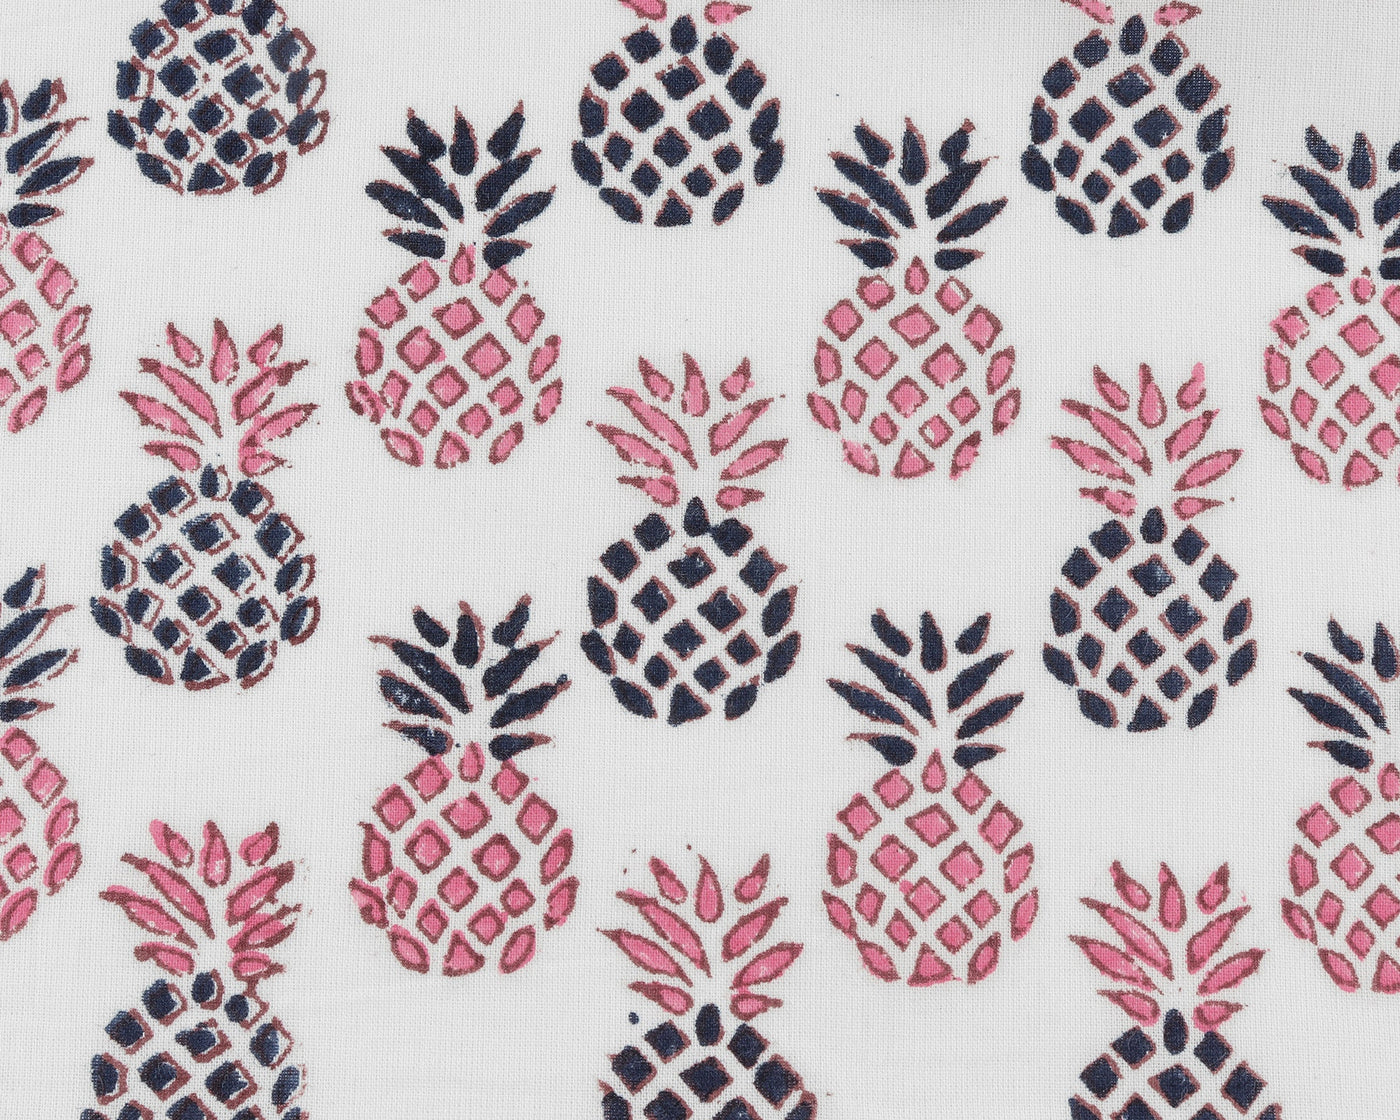 Pink and Blue Indian Pineapple Block Printed 100% Pure Cotton Cloth Napkins set of 2,4,6,12, 18x18"- Cocktail Napkins, 20x20"- Dinner Napkins